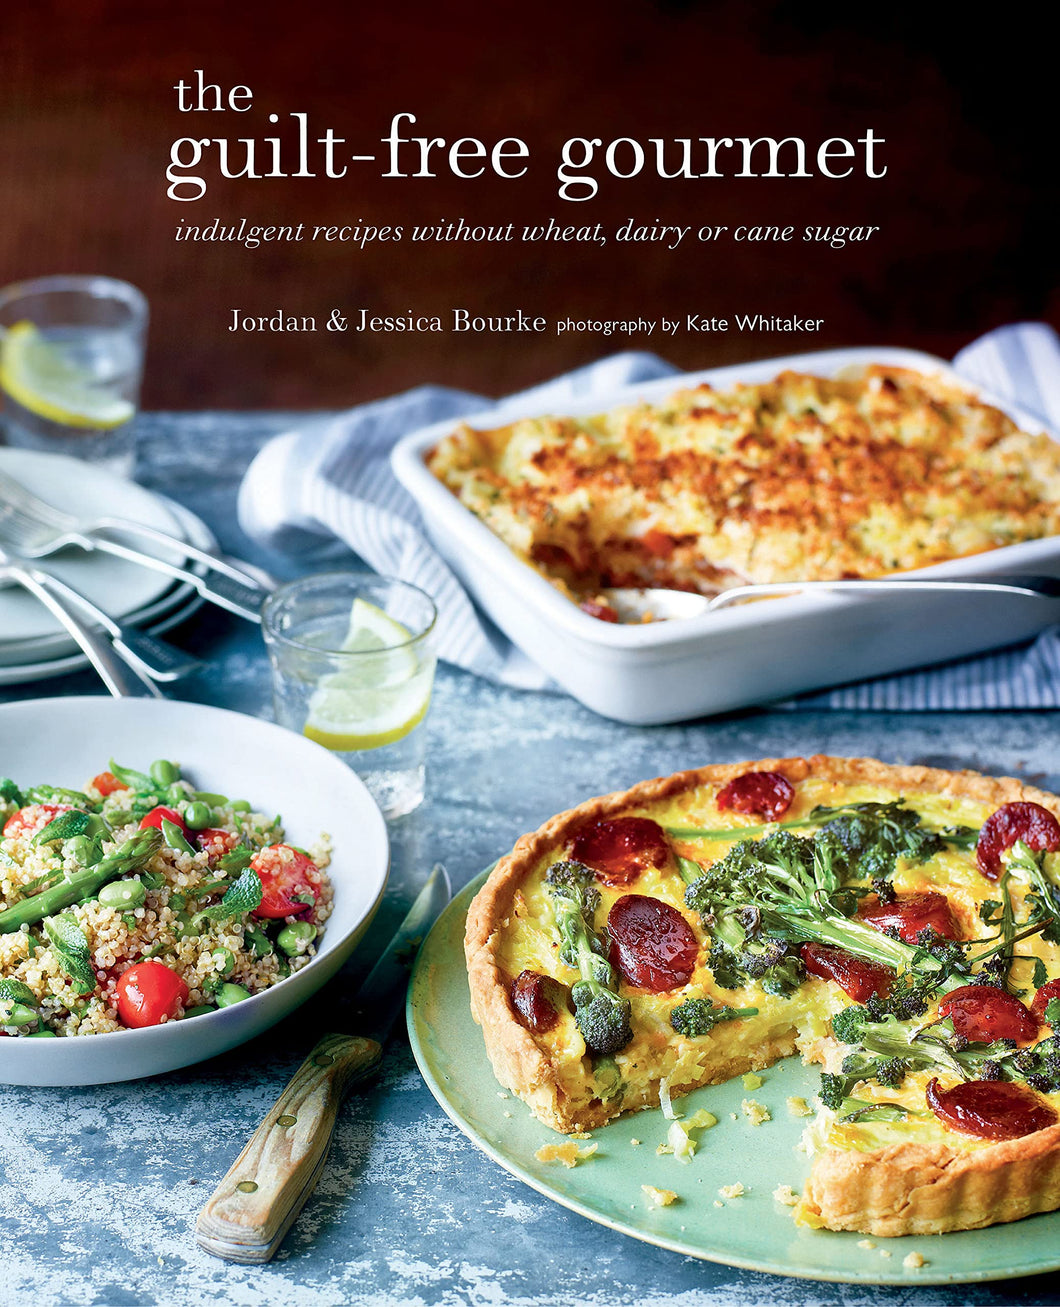 The Guilt-Free Gourmet: Indulgent Recipes Without Wheat, Dairy or Cane Sugar